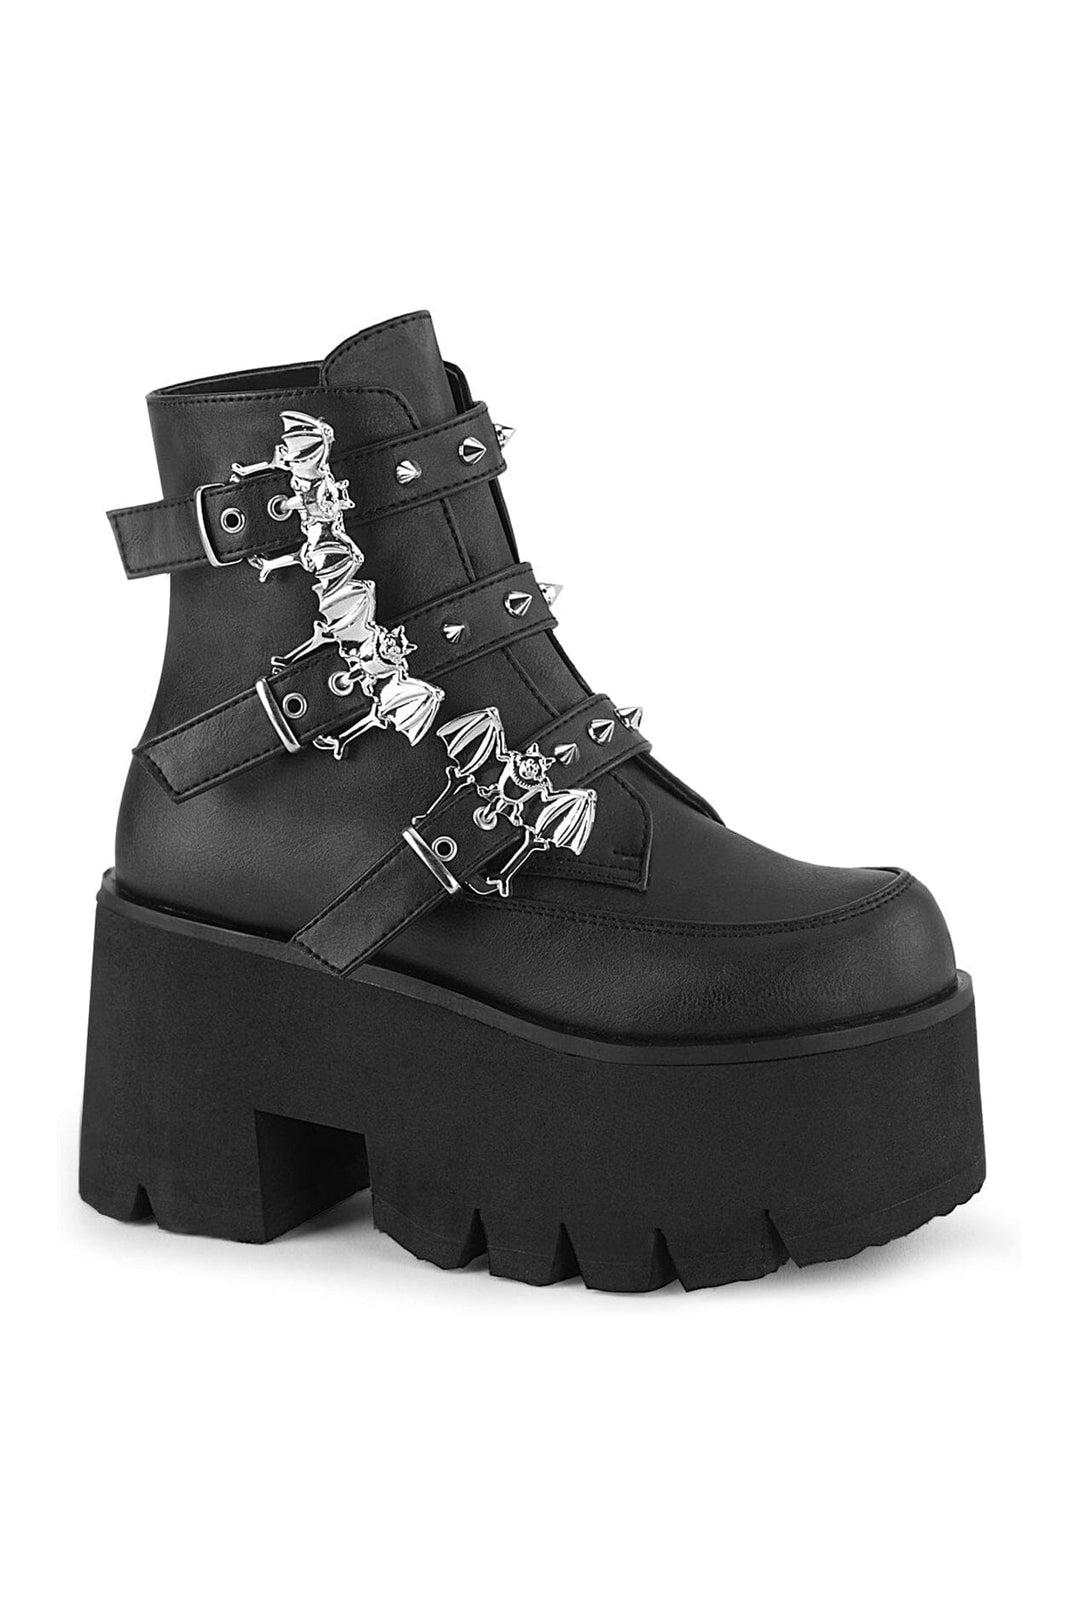 ASHES-55 Black Vegan Leather Ankle Boot-Ankle Boots-Demonia-Black-10-Vegan Leather-SEXYSHOES.COM